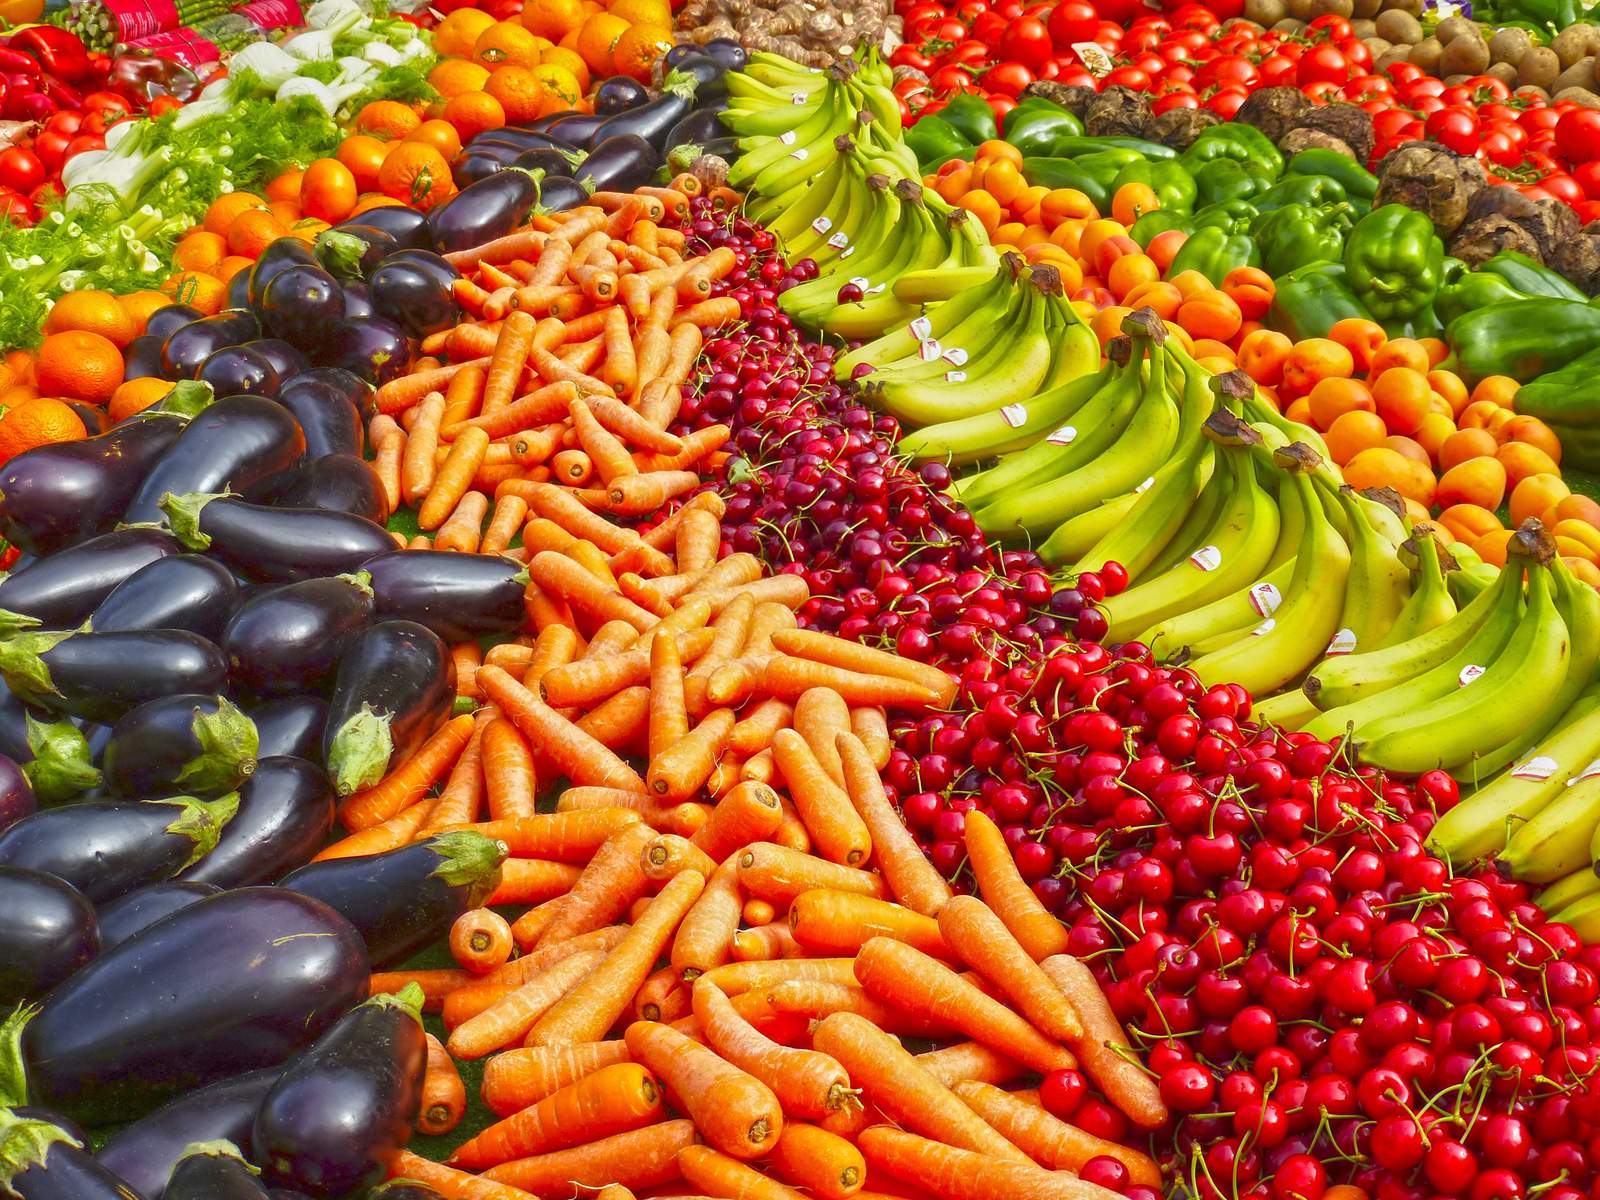 Texas Health and Human Services to provide more than $168M in emergency SNAP food benefits